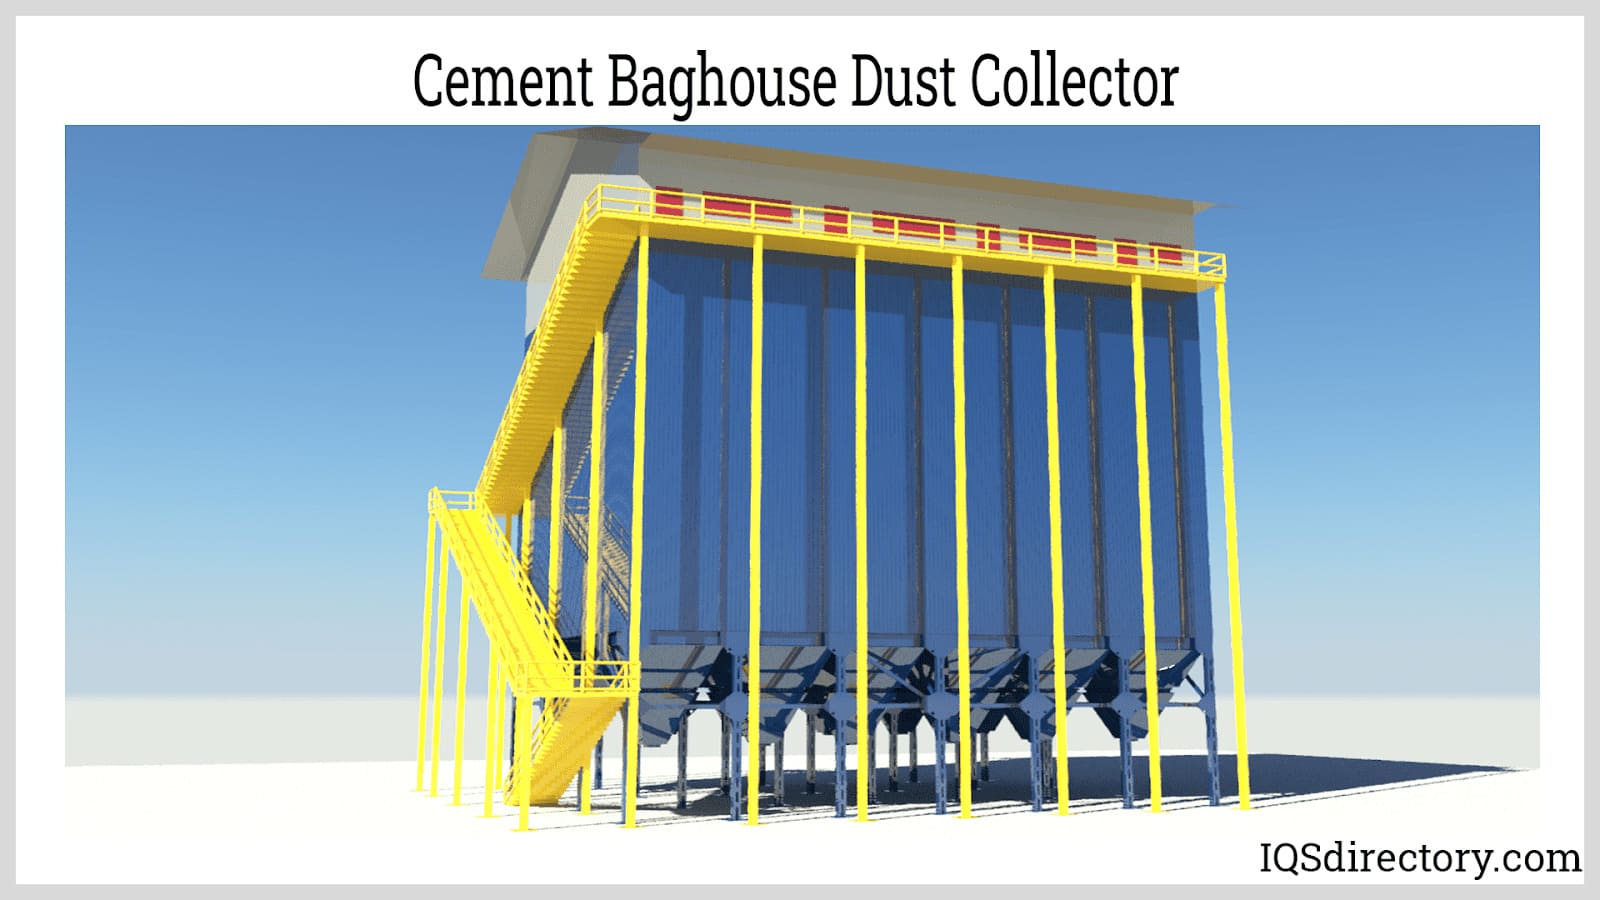 Cement Baghouse Dust Collector